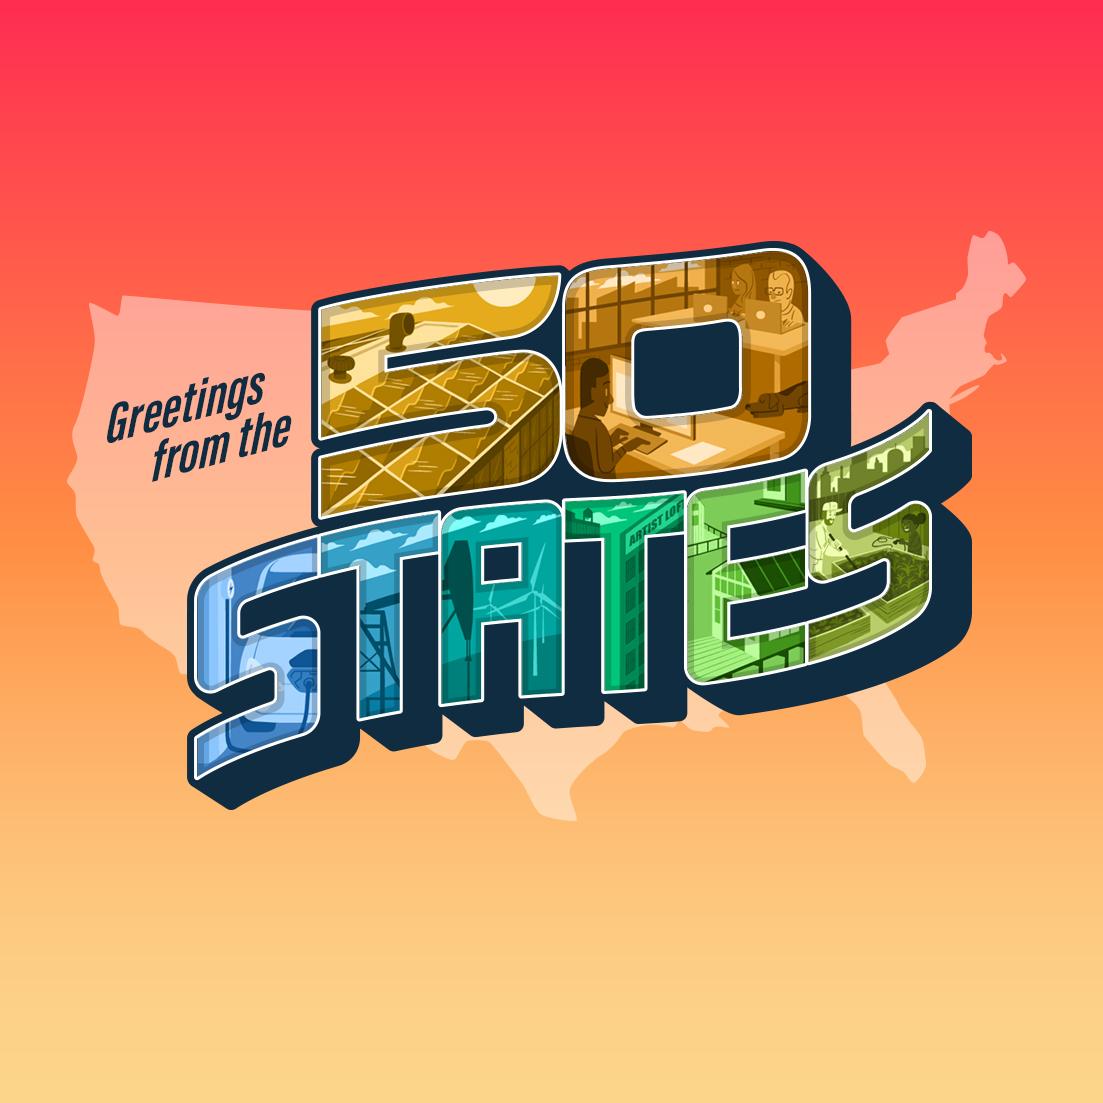 Greetings from the 50 states is written over the shape of the continental United States in a throwback postcard style. Inside the letters are scene from across America: wind turbines, tall buildings, people working in offices, oil rigs.